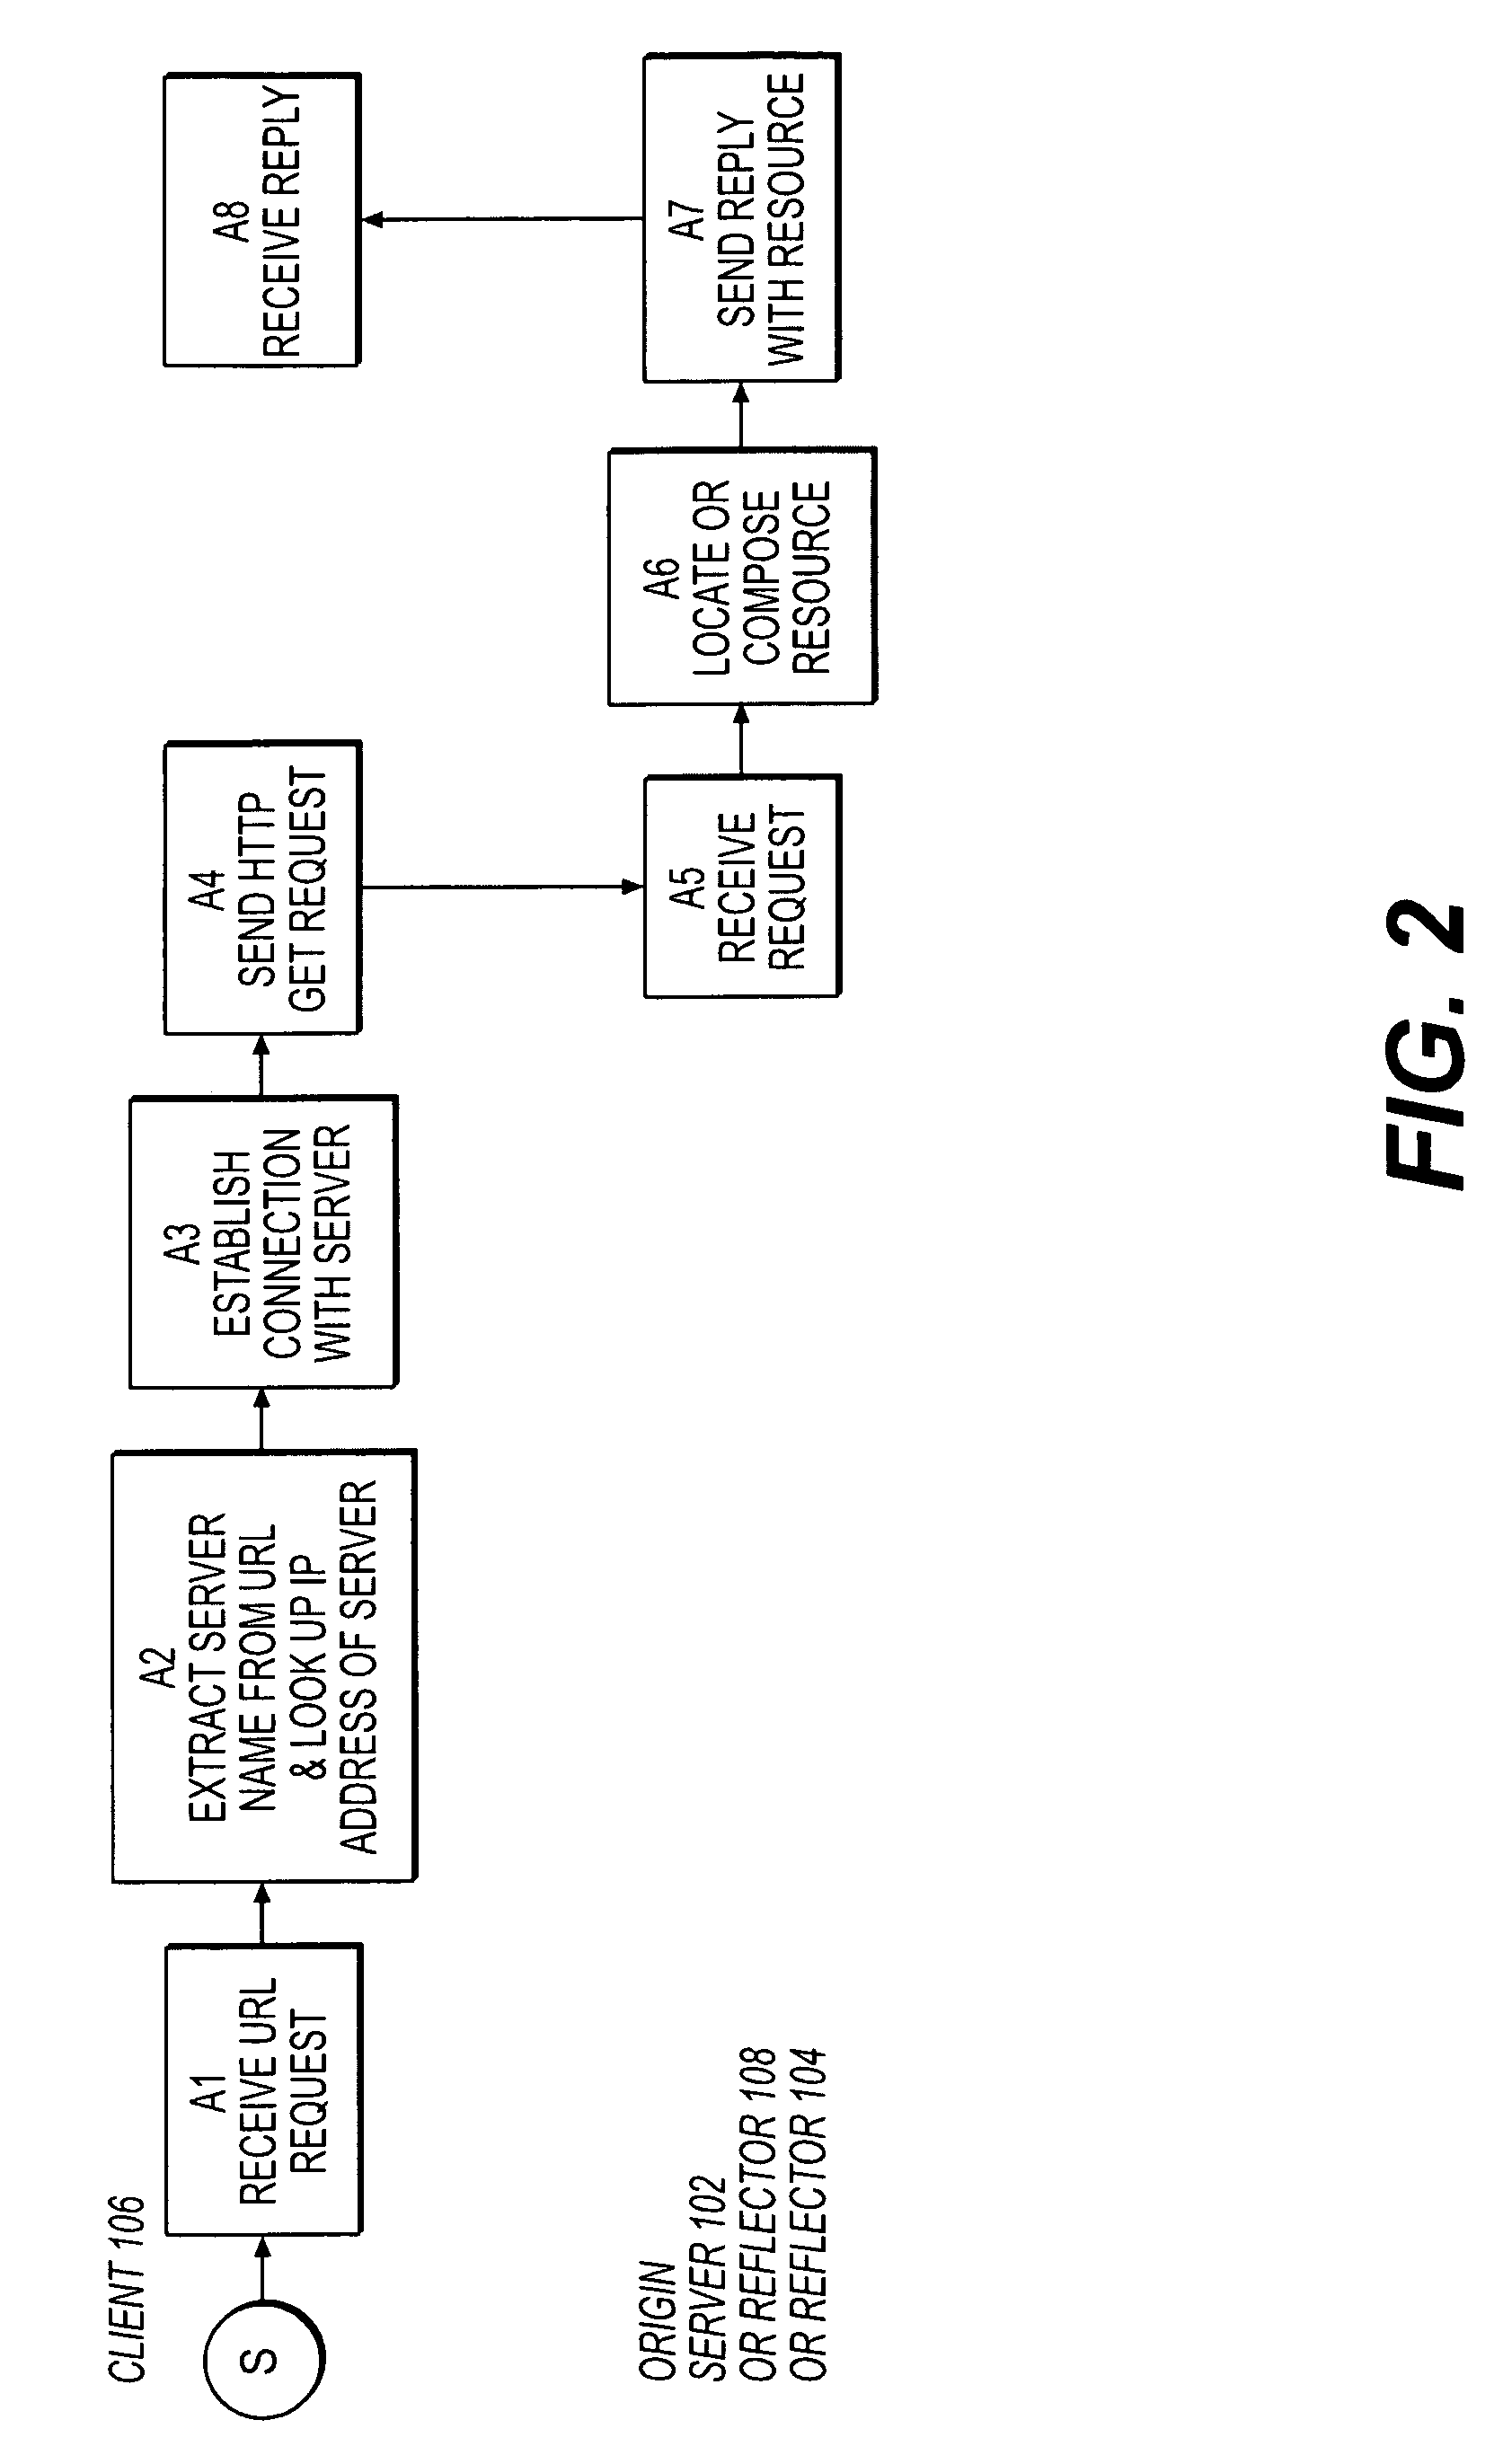 Controlling subscriber information rates in a content delivery network